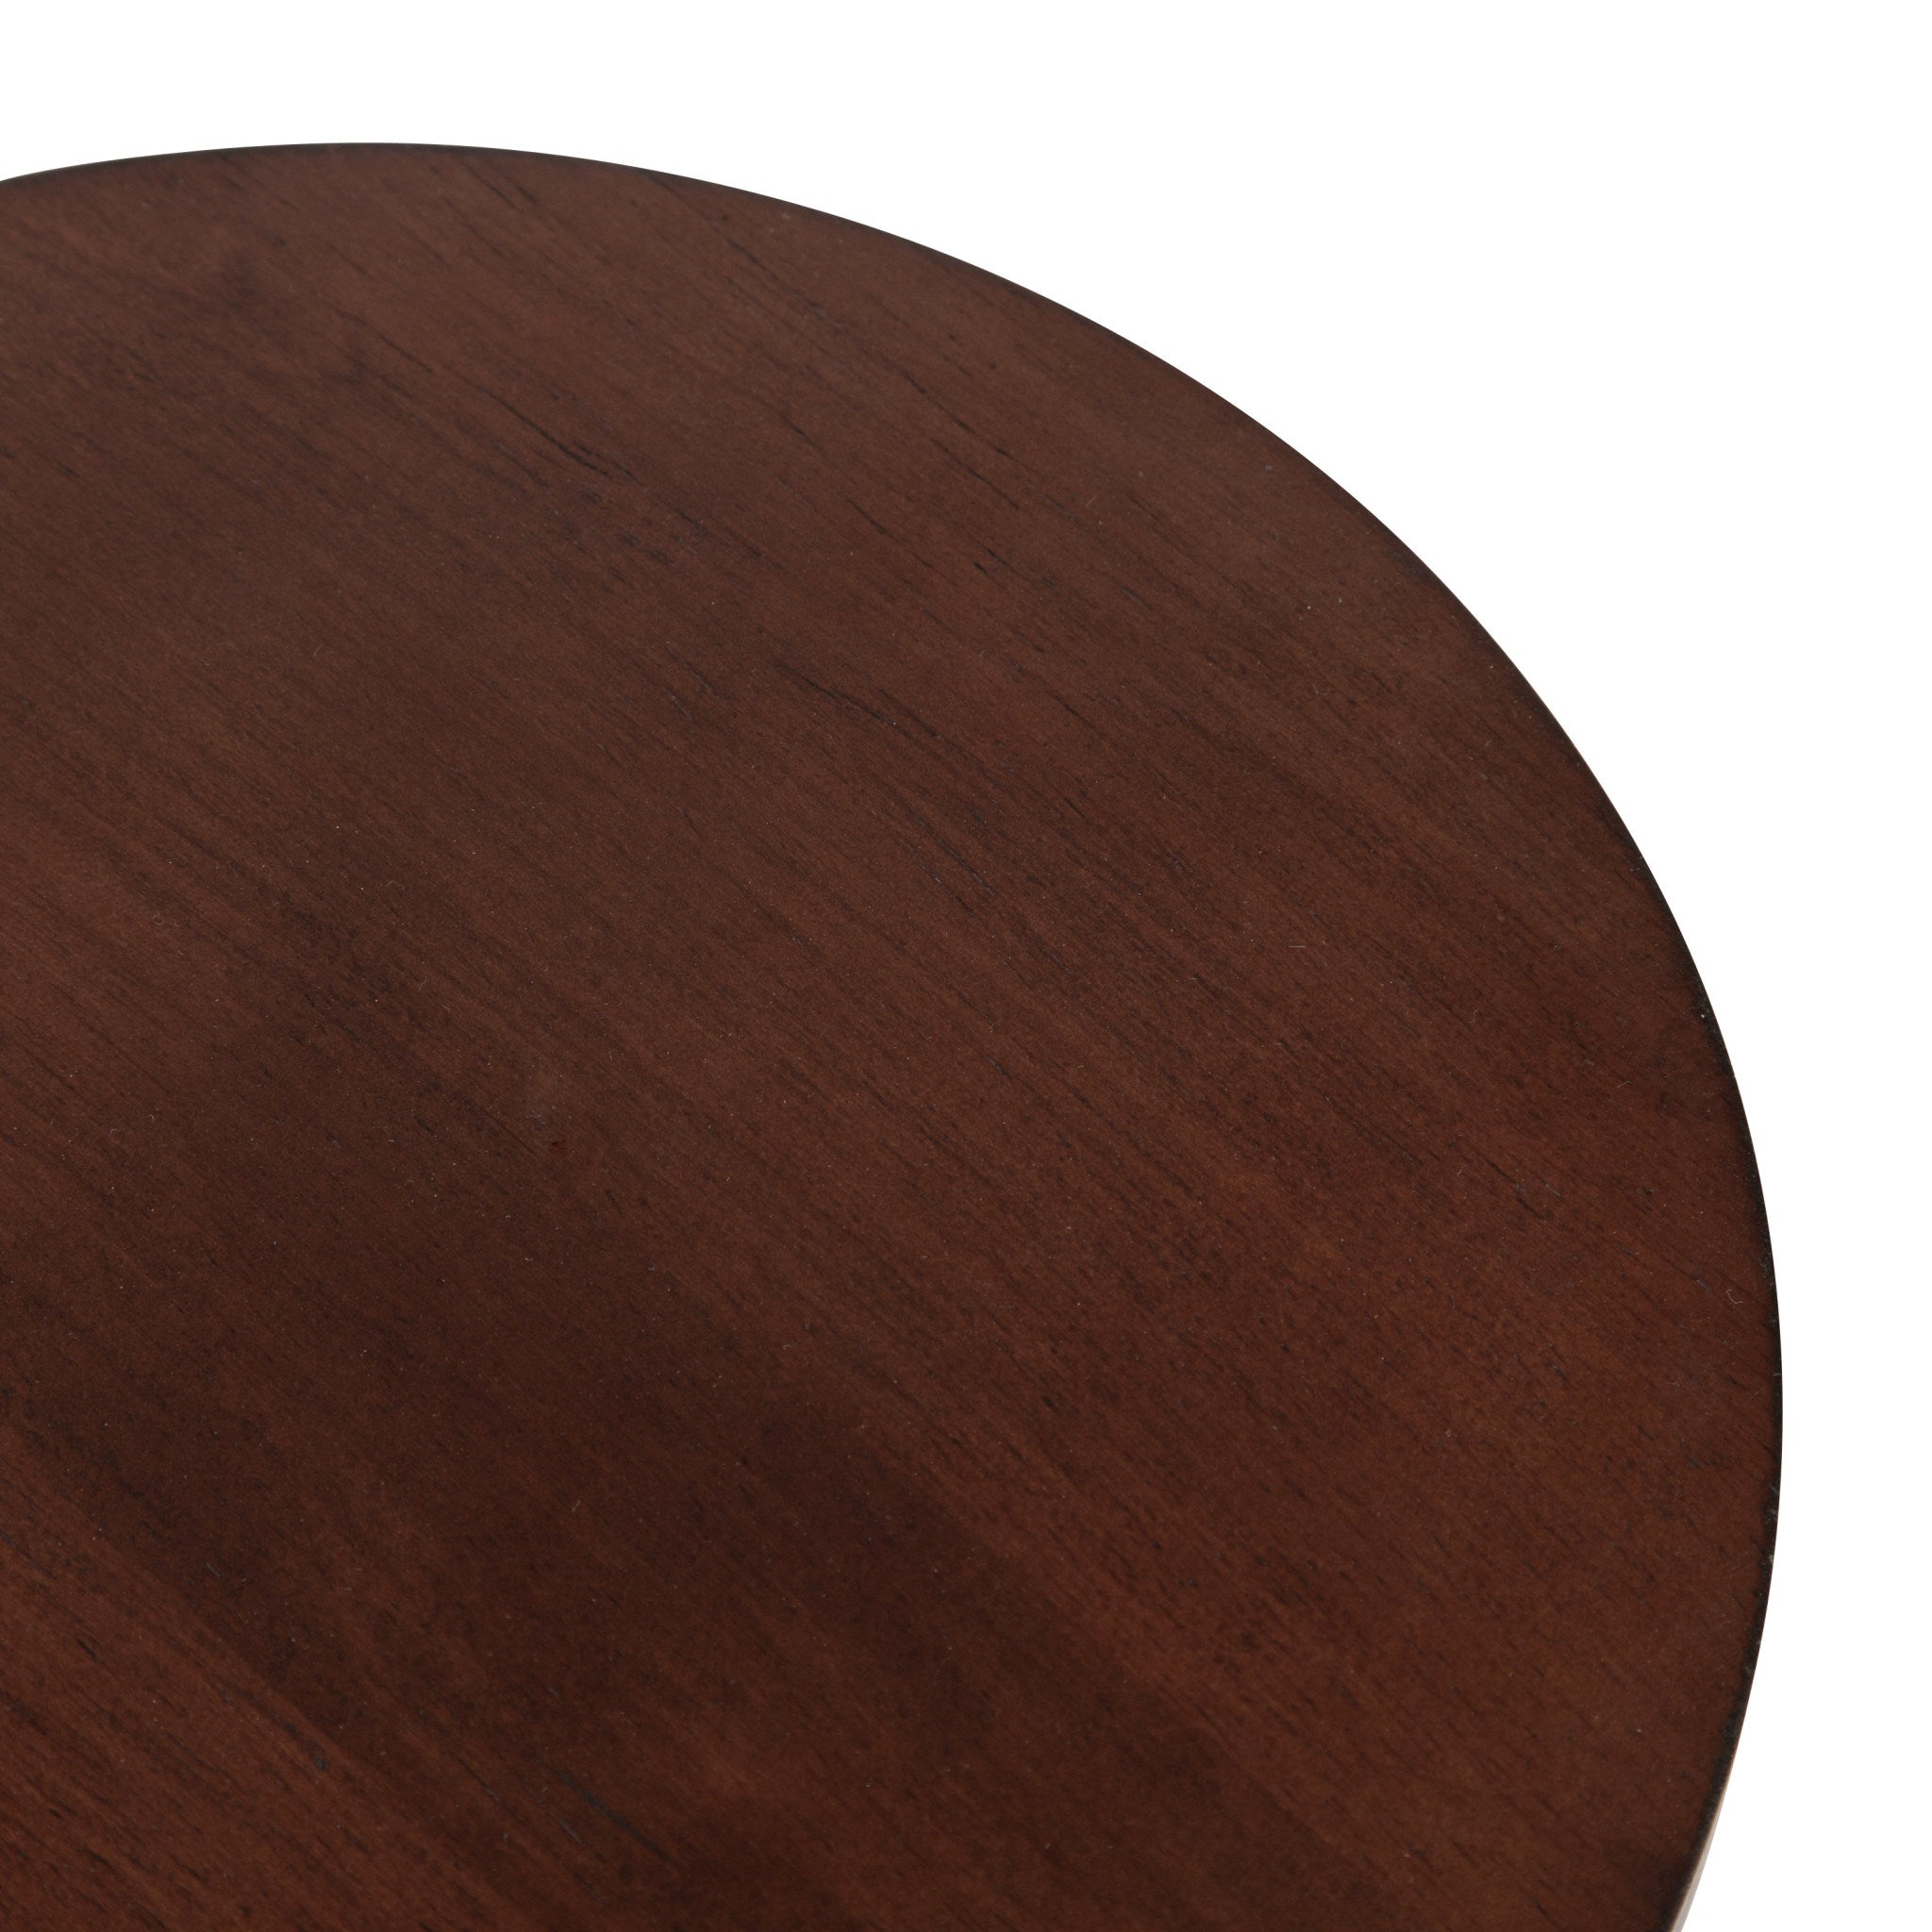 Rioux Round Wood Nesting Tables